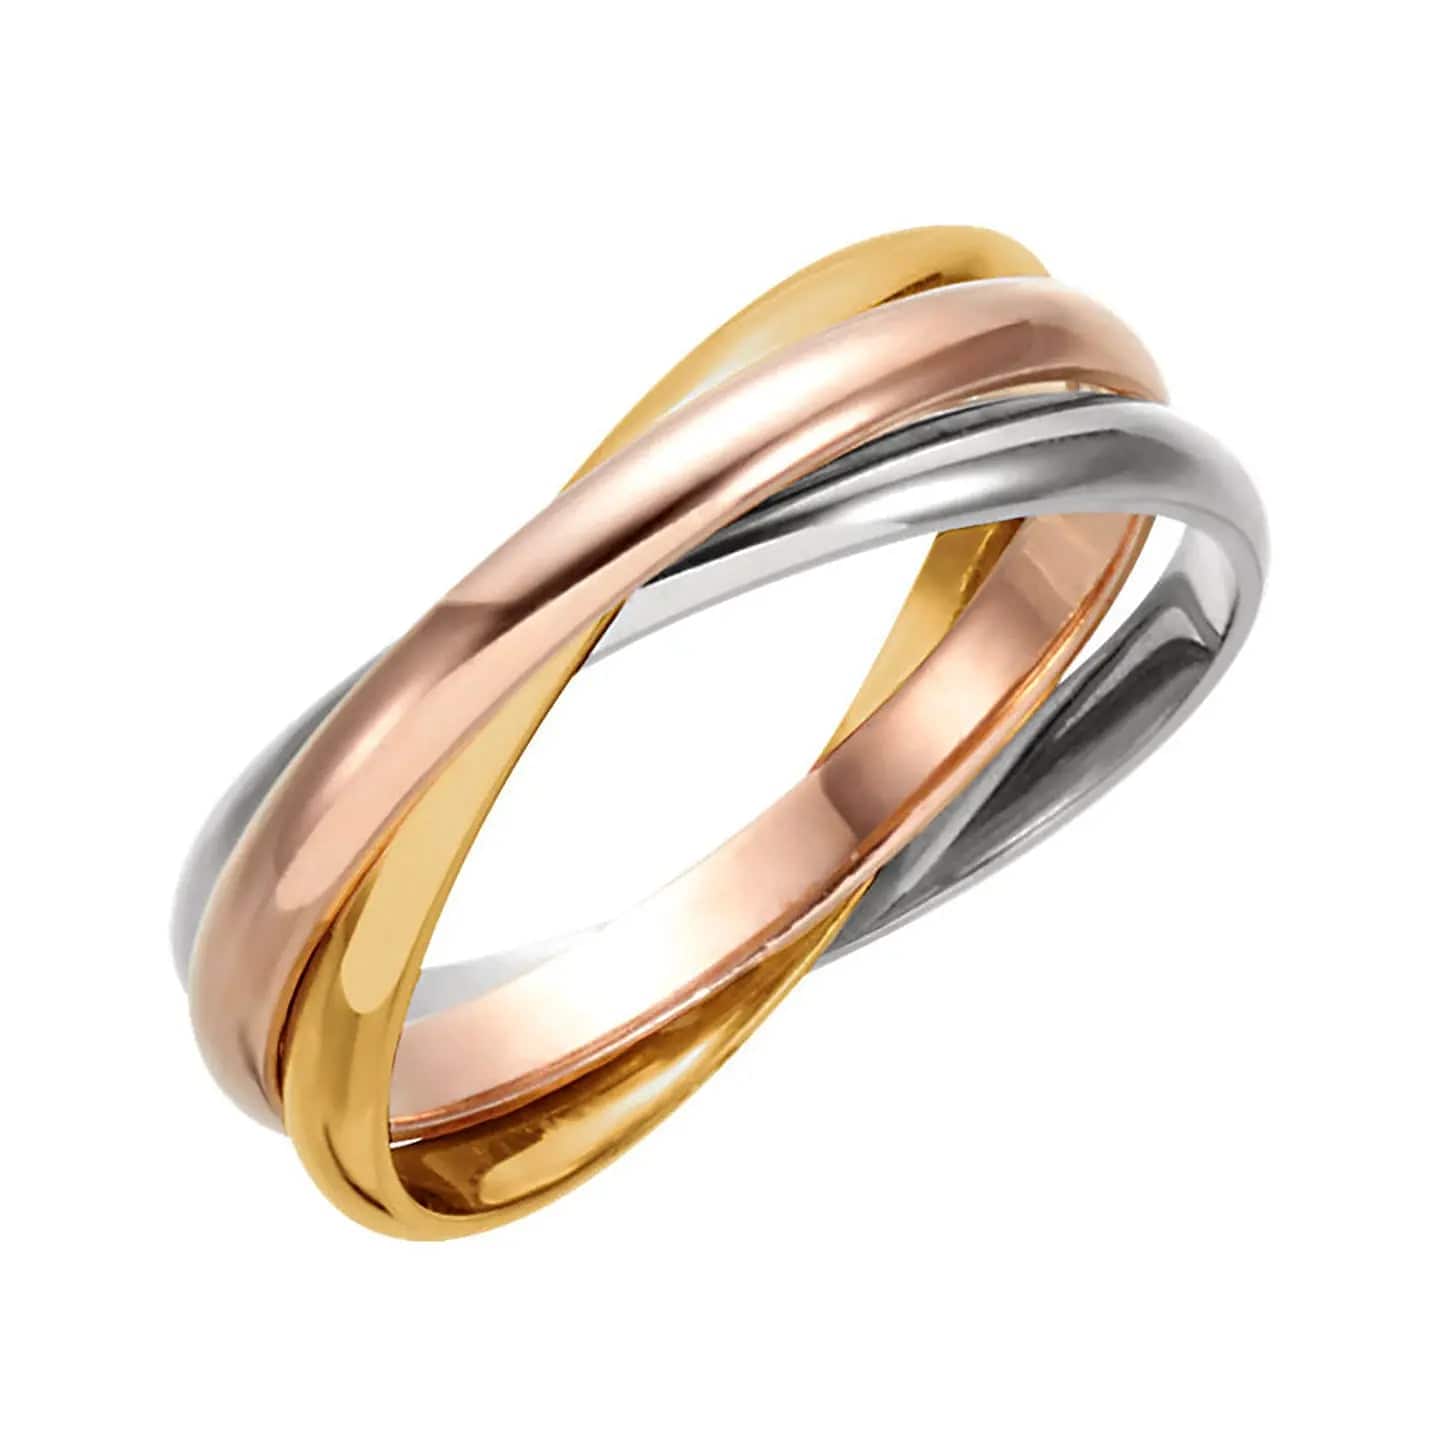 Tricolor Threaded Stack - Minimalistic Gold, Silver, Rose Gold Ring Set - Baza Boutique 